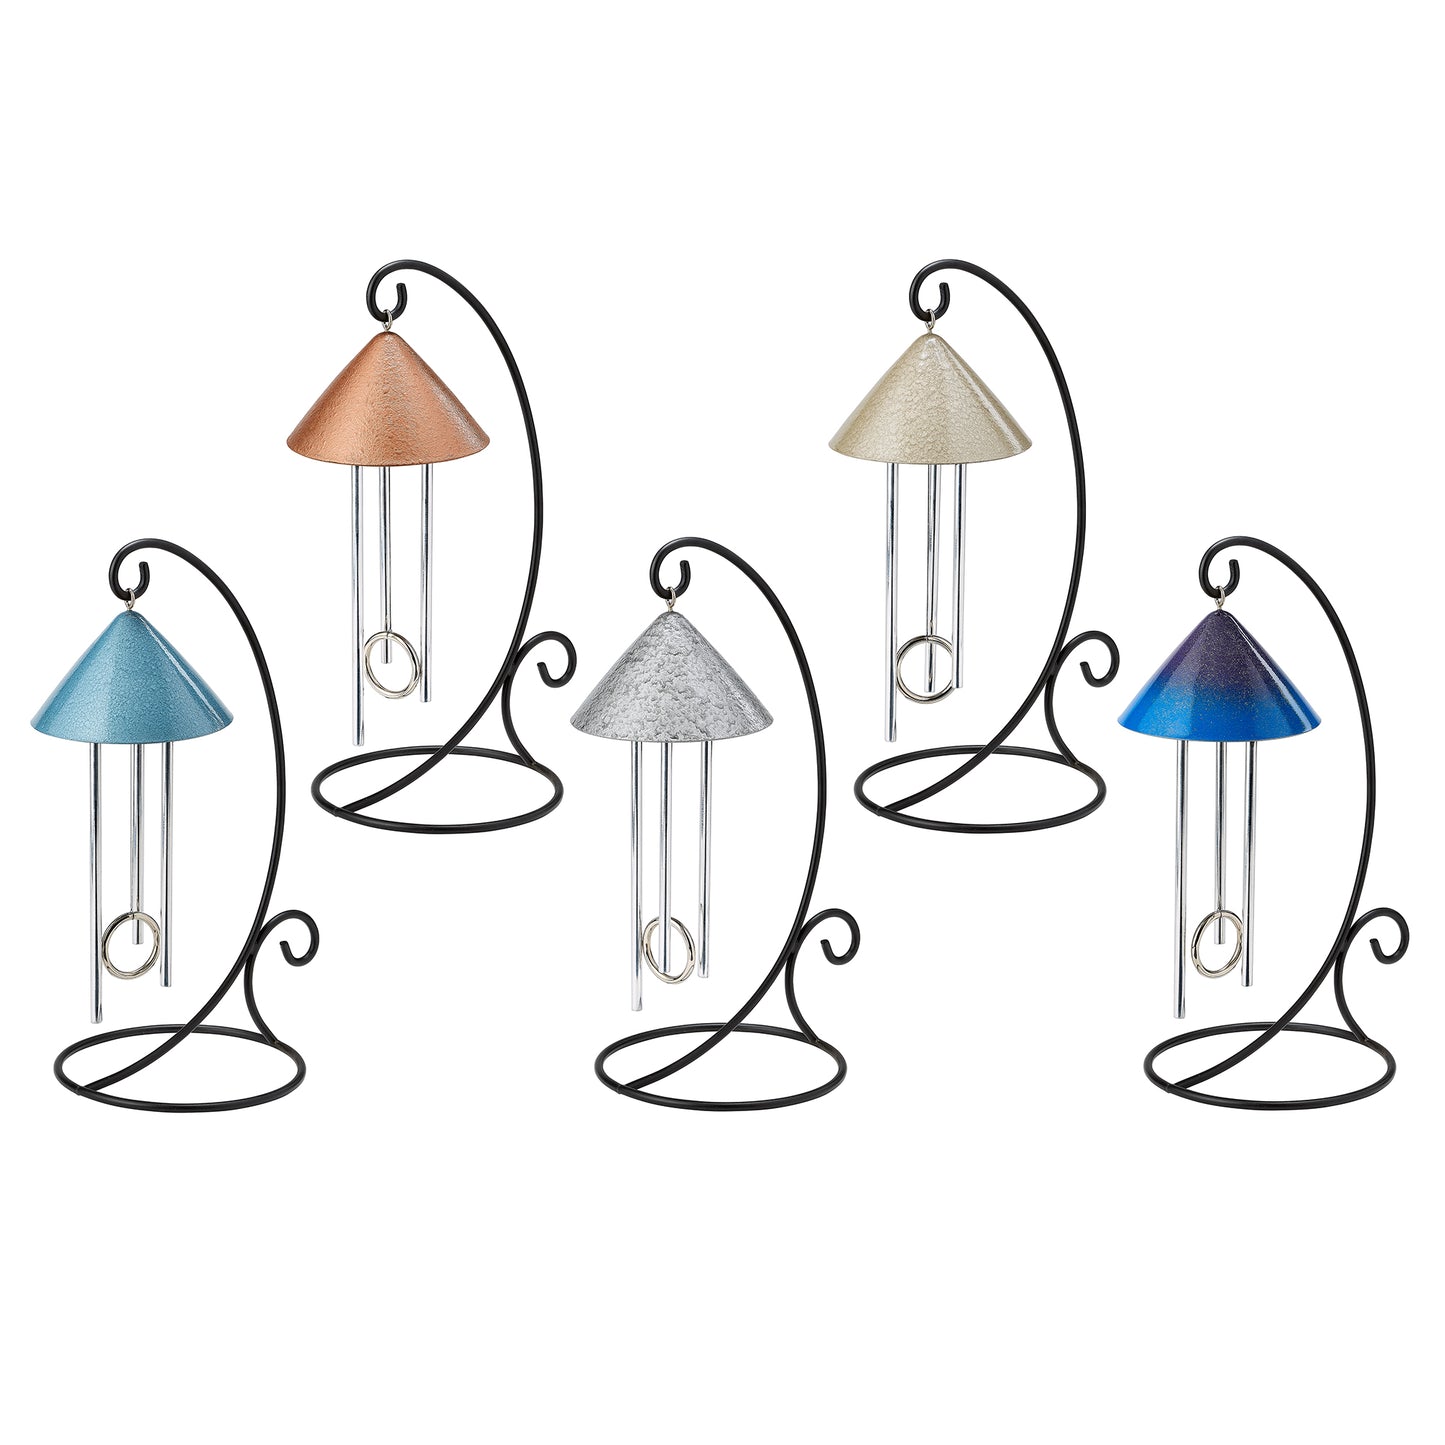 Indoor solar wind chime in a variety of colors to suit any decor